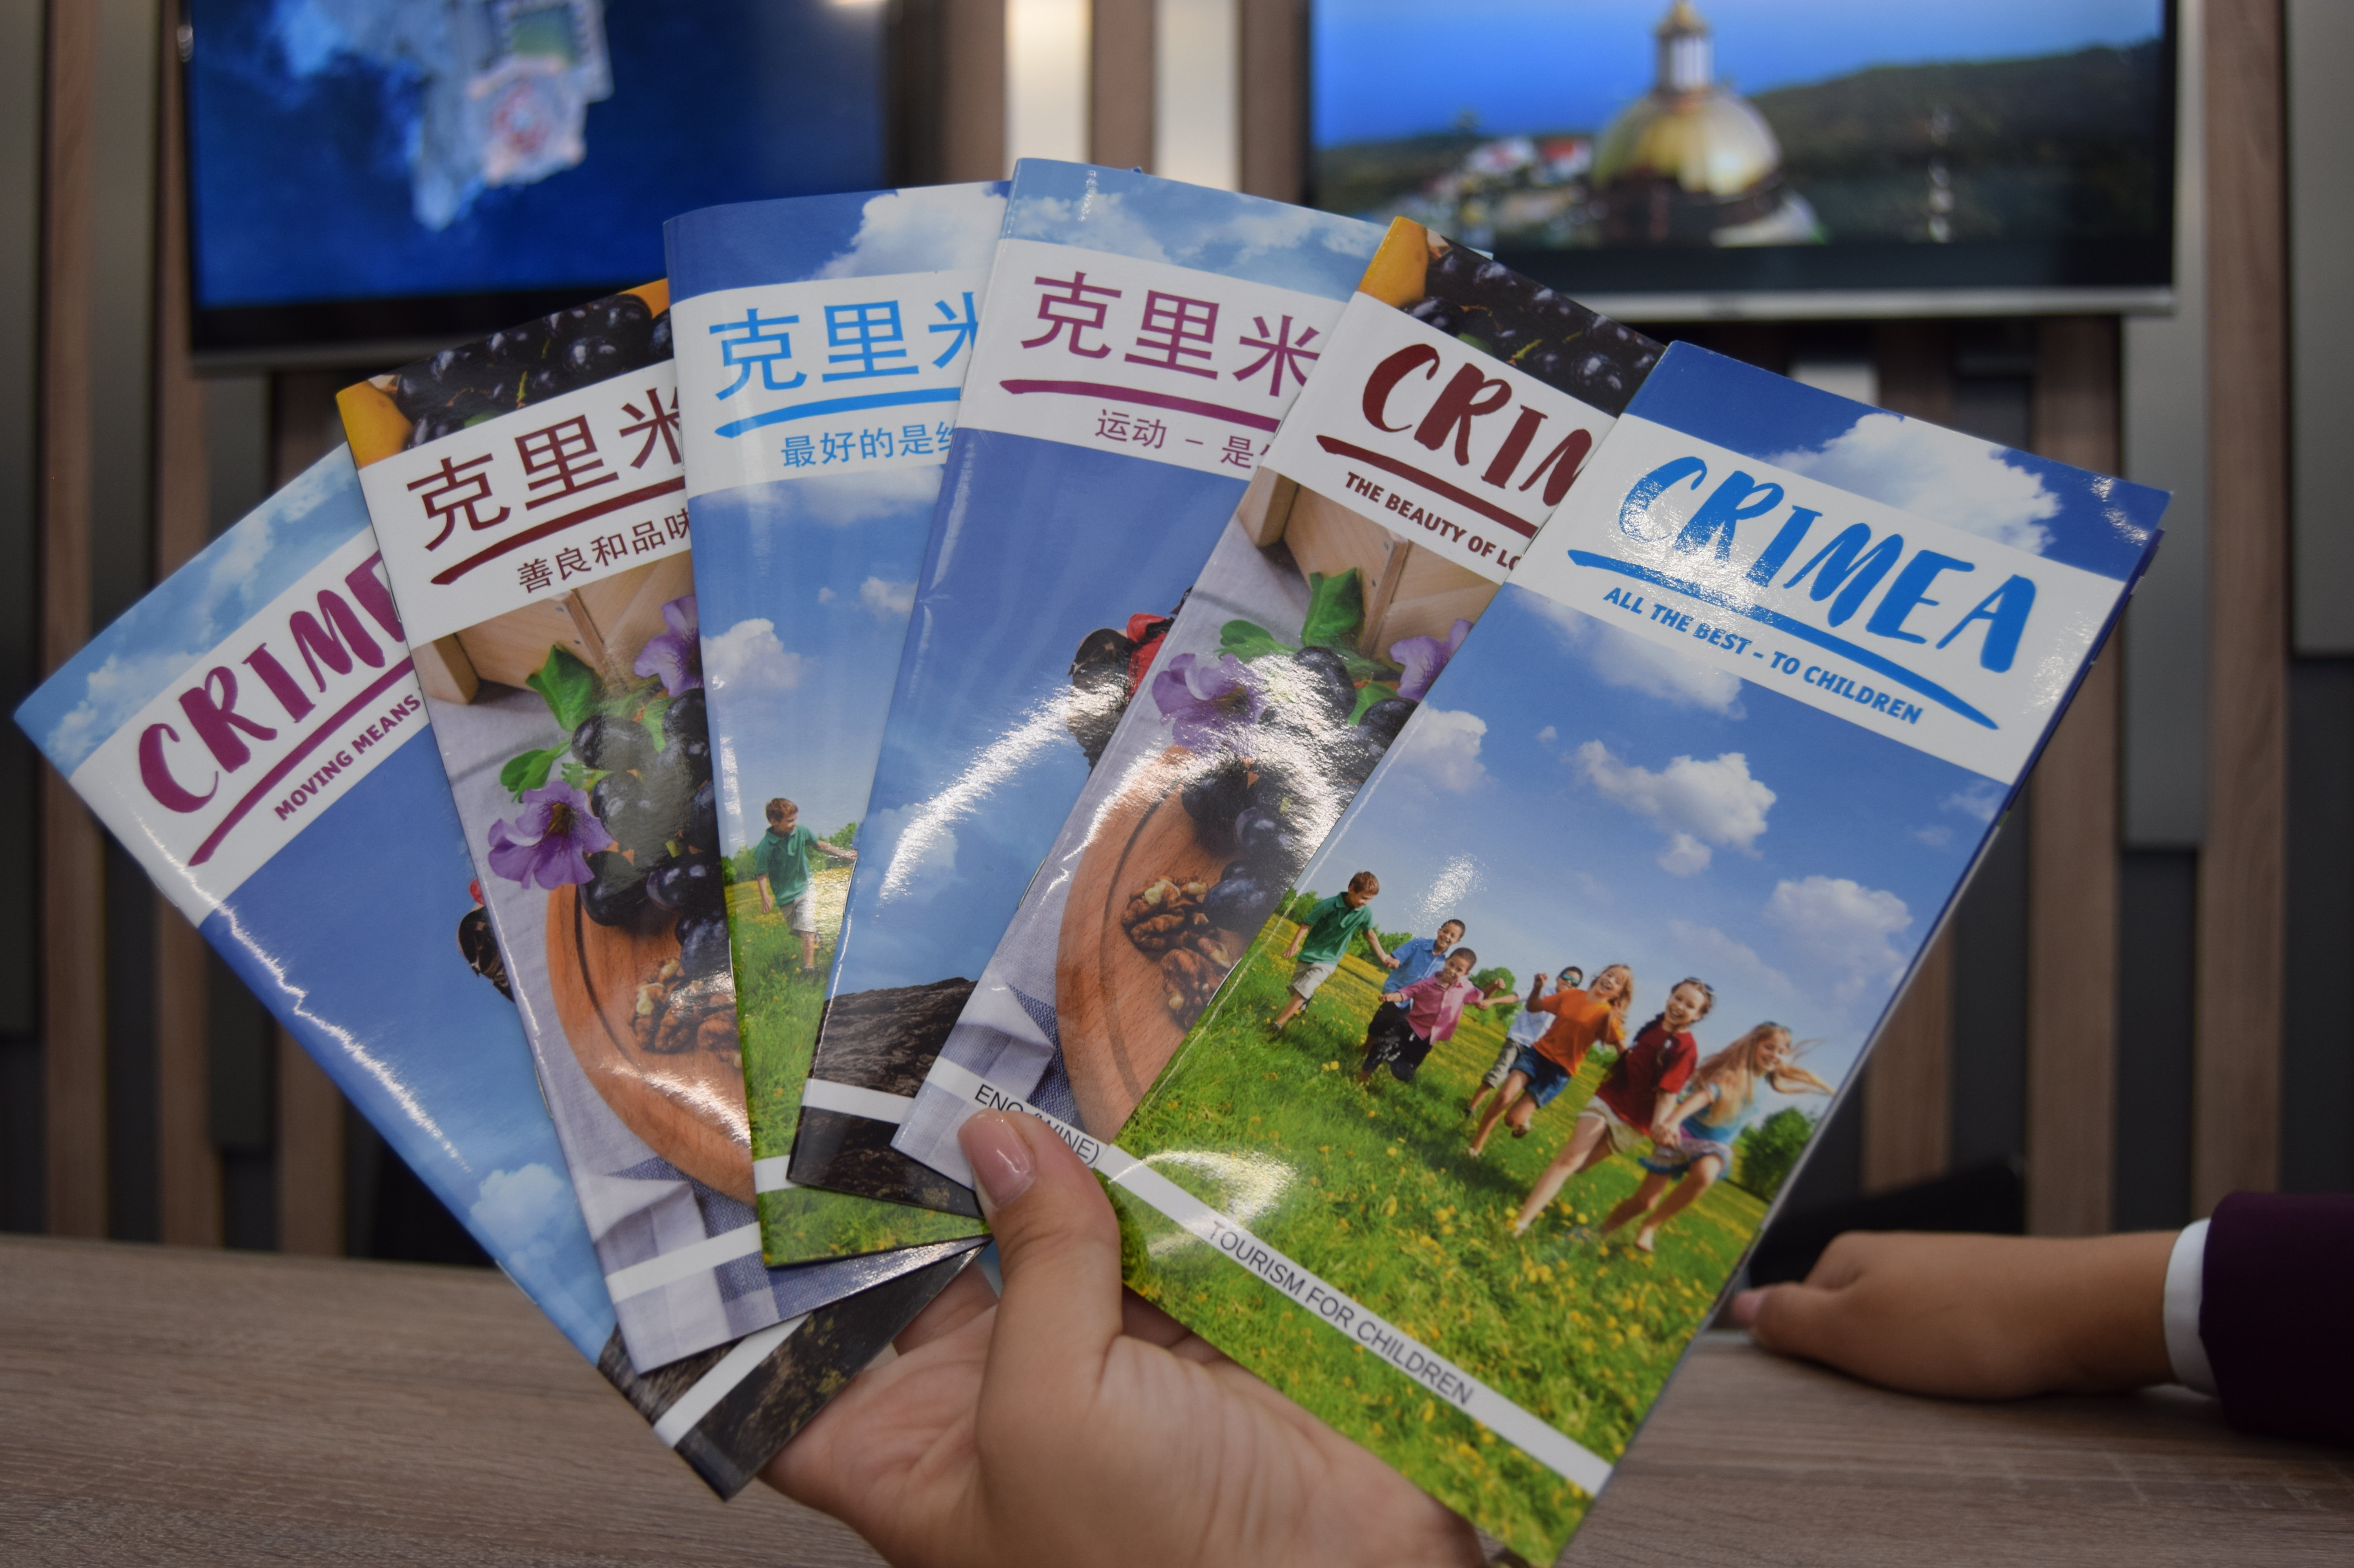  Brochures of the tourist information center at the airport of Simferopol